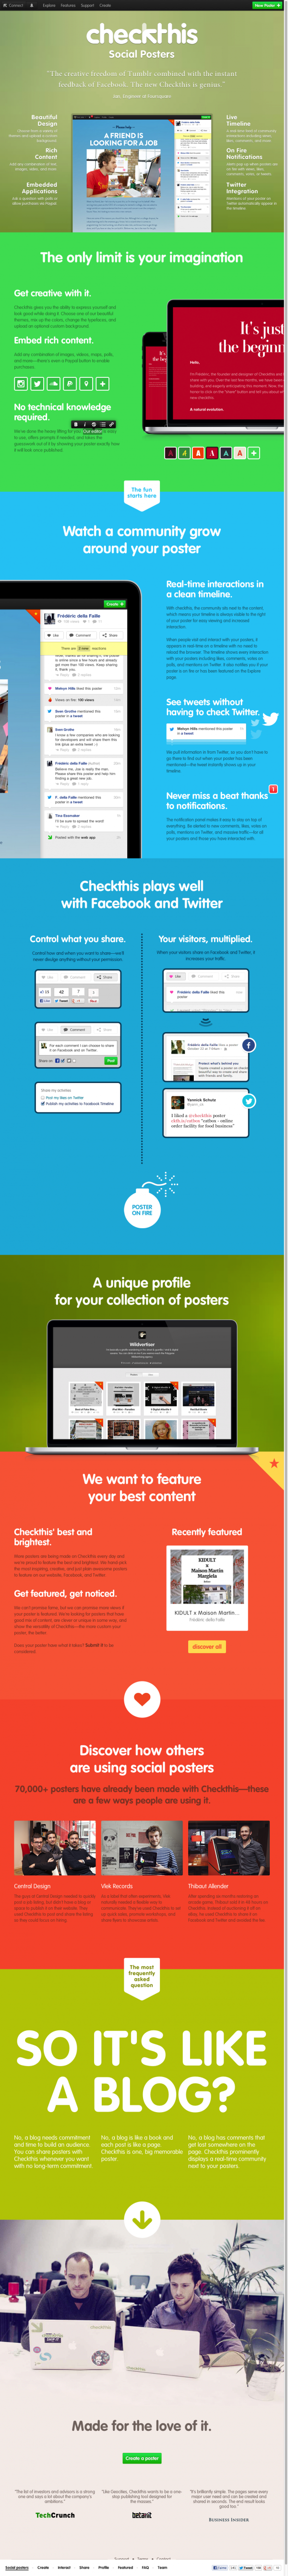 Social Posters - Discover the new Checkthis